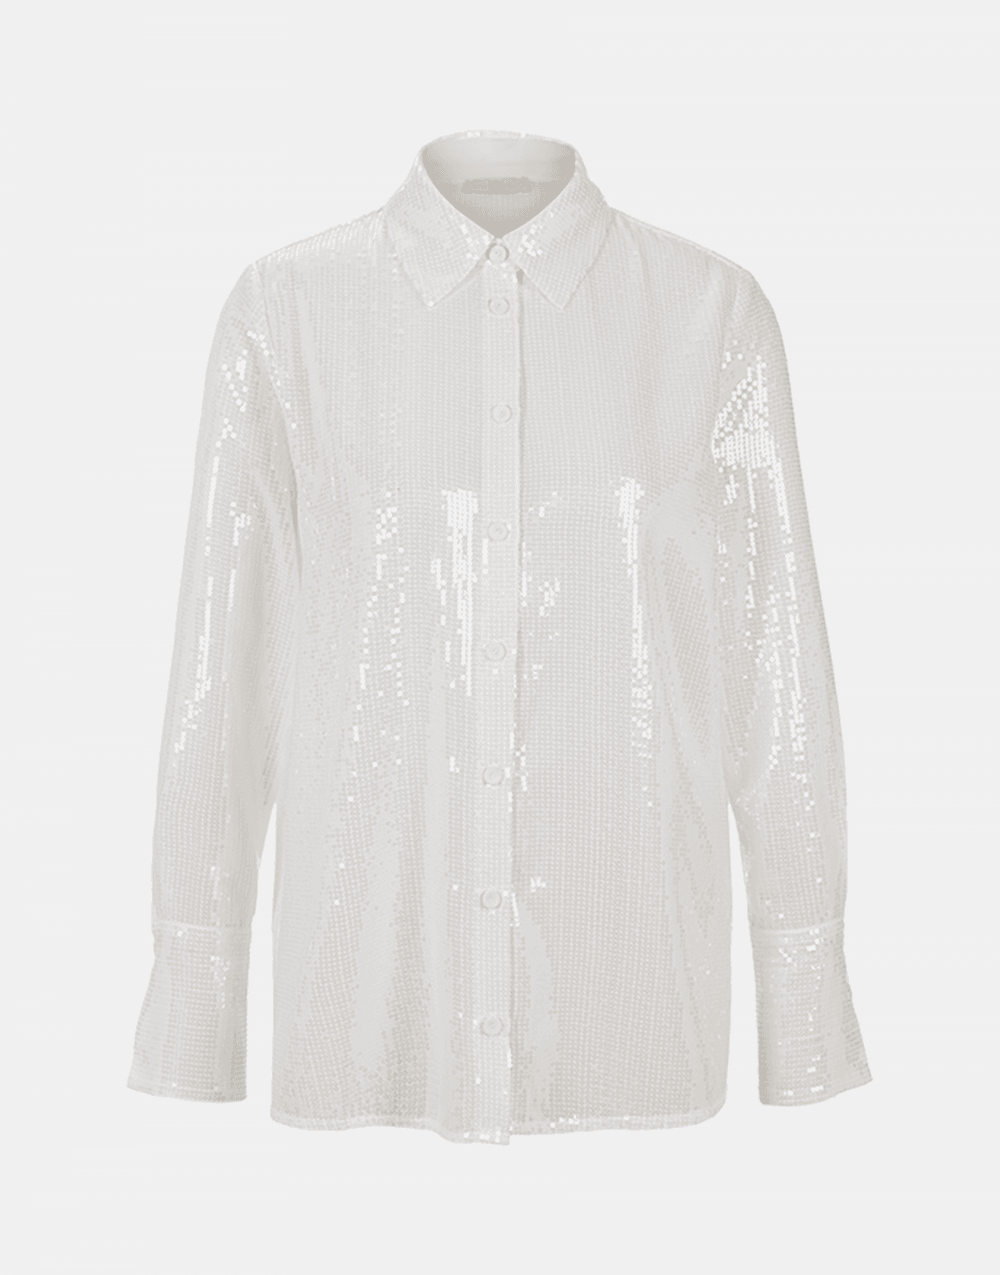 Riani Sequin Button Up Shirt Col: 110 Off White